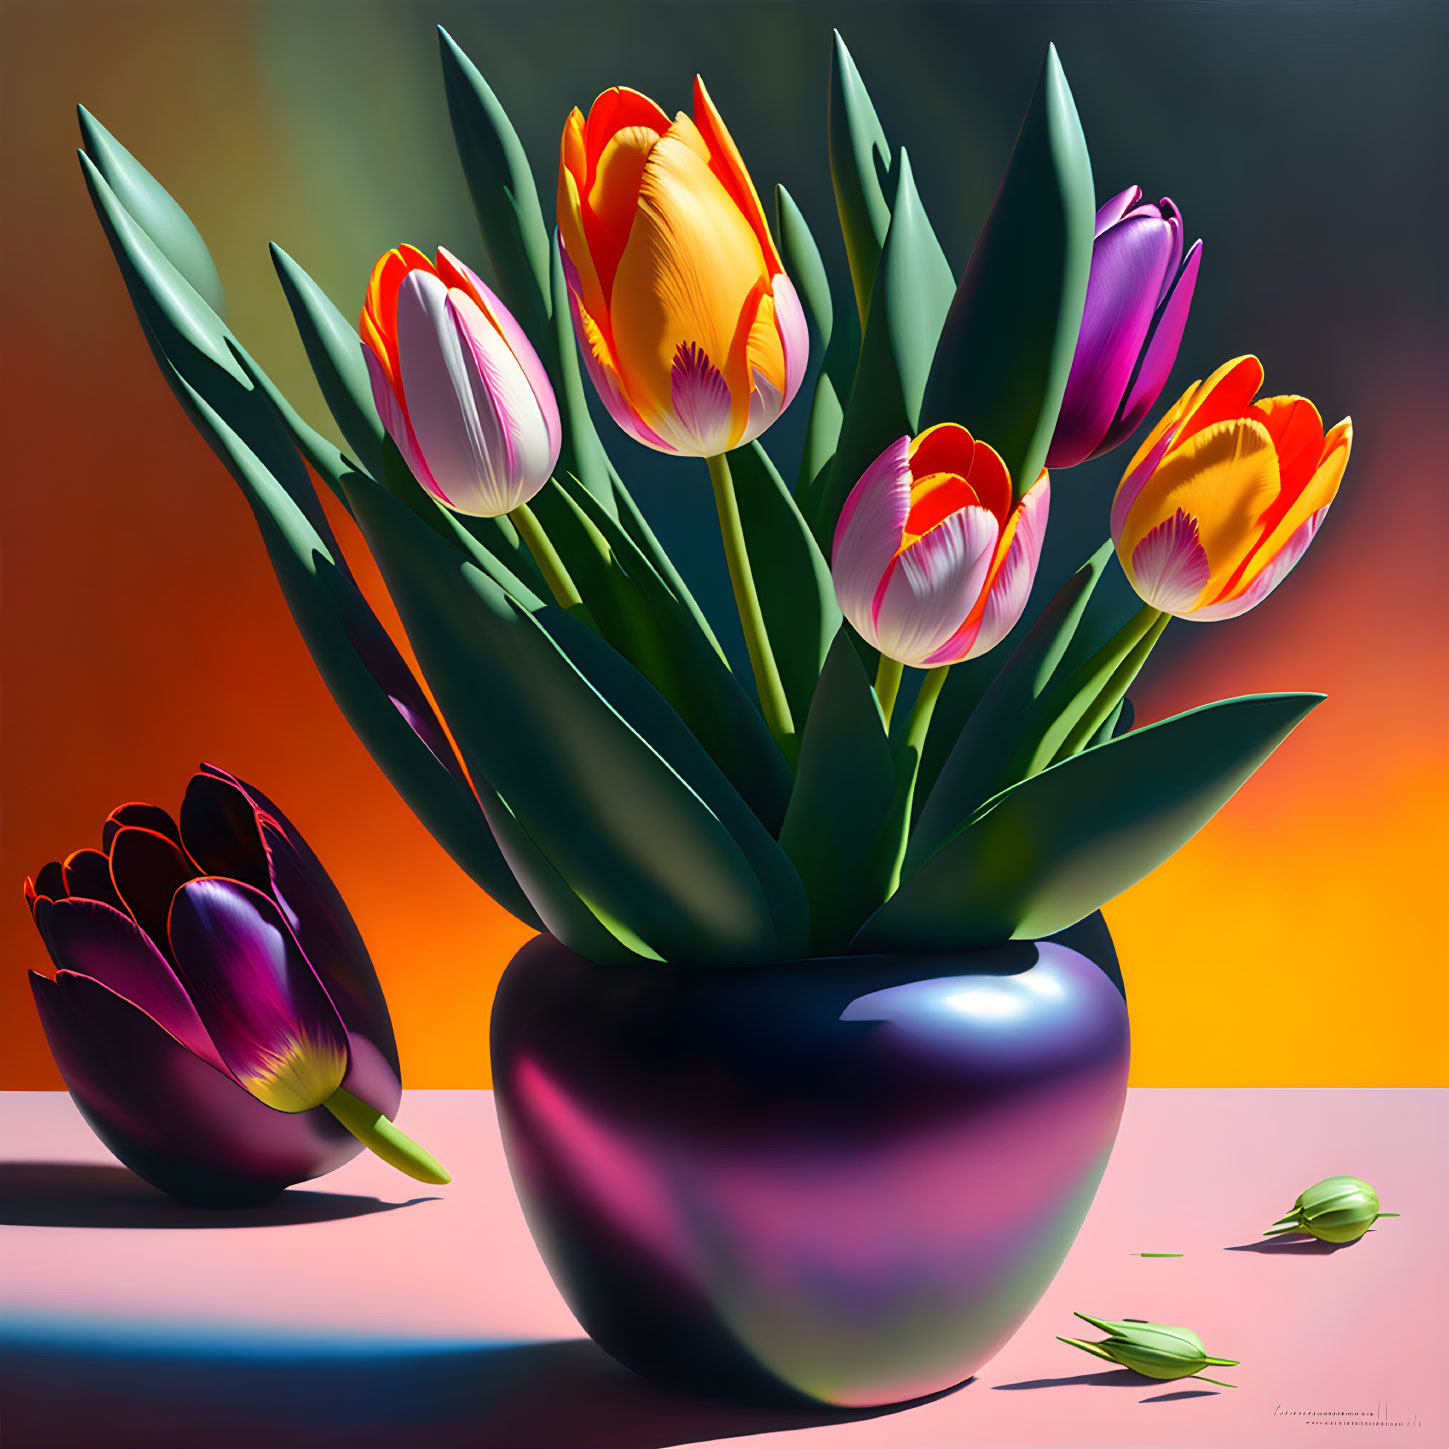 Tulips and buds 